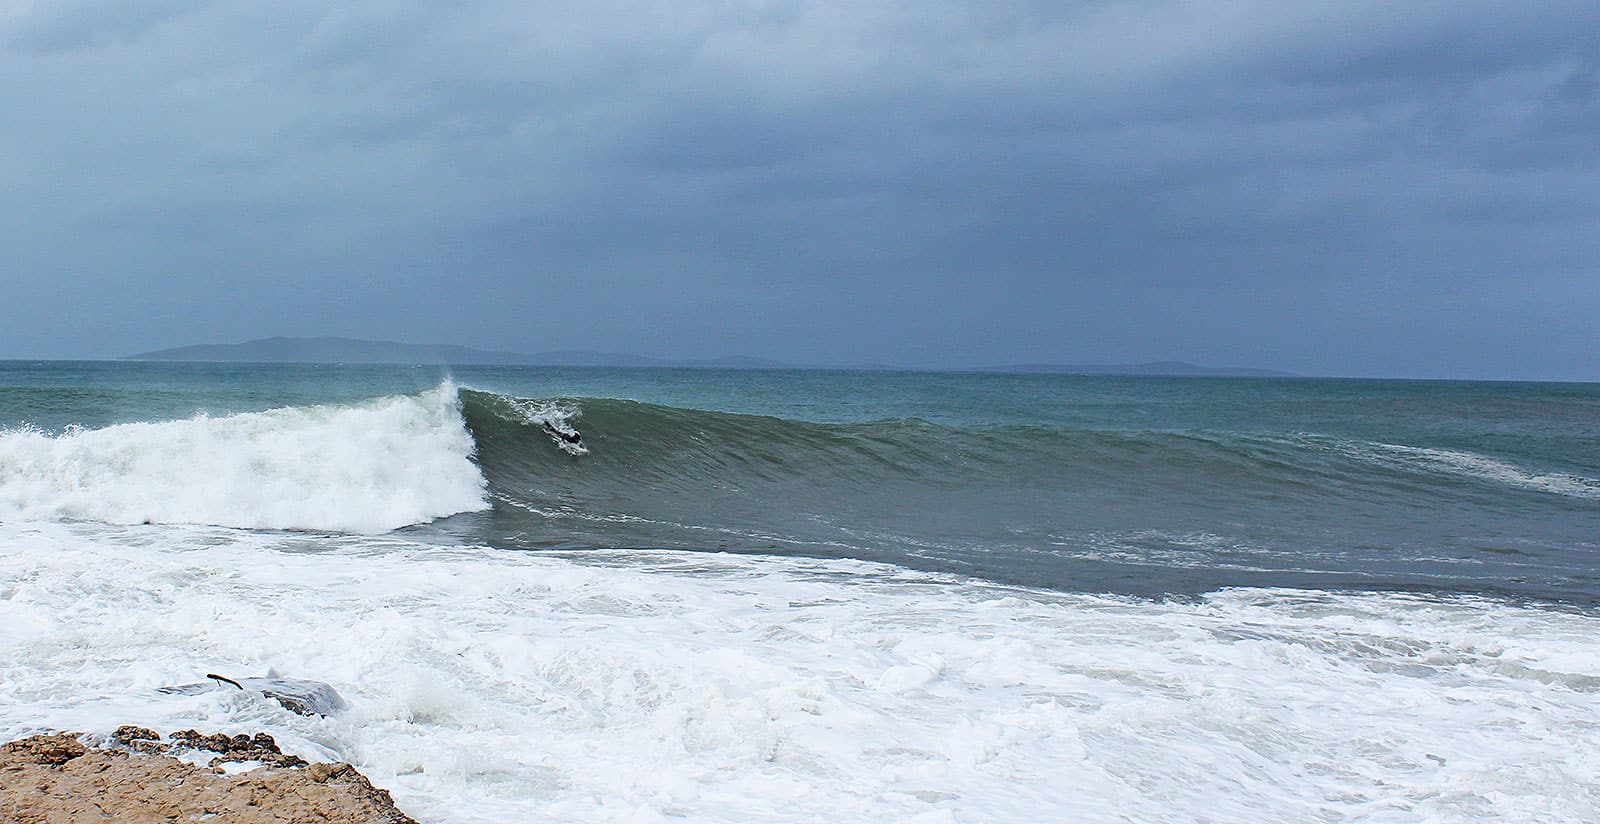 A left hand wave with a surfer catching it.